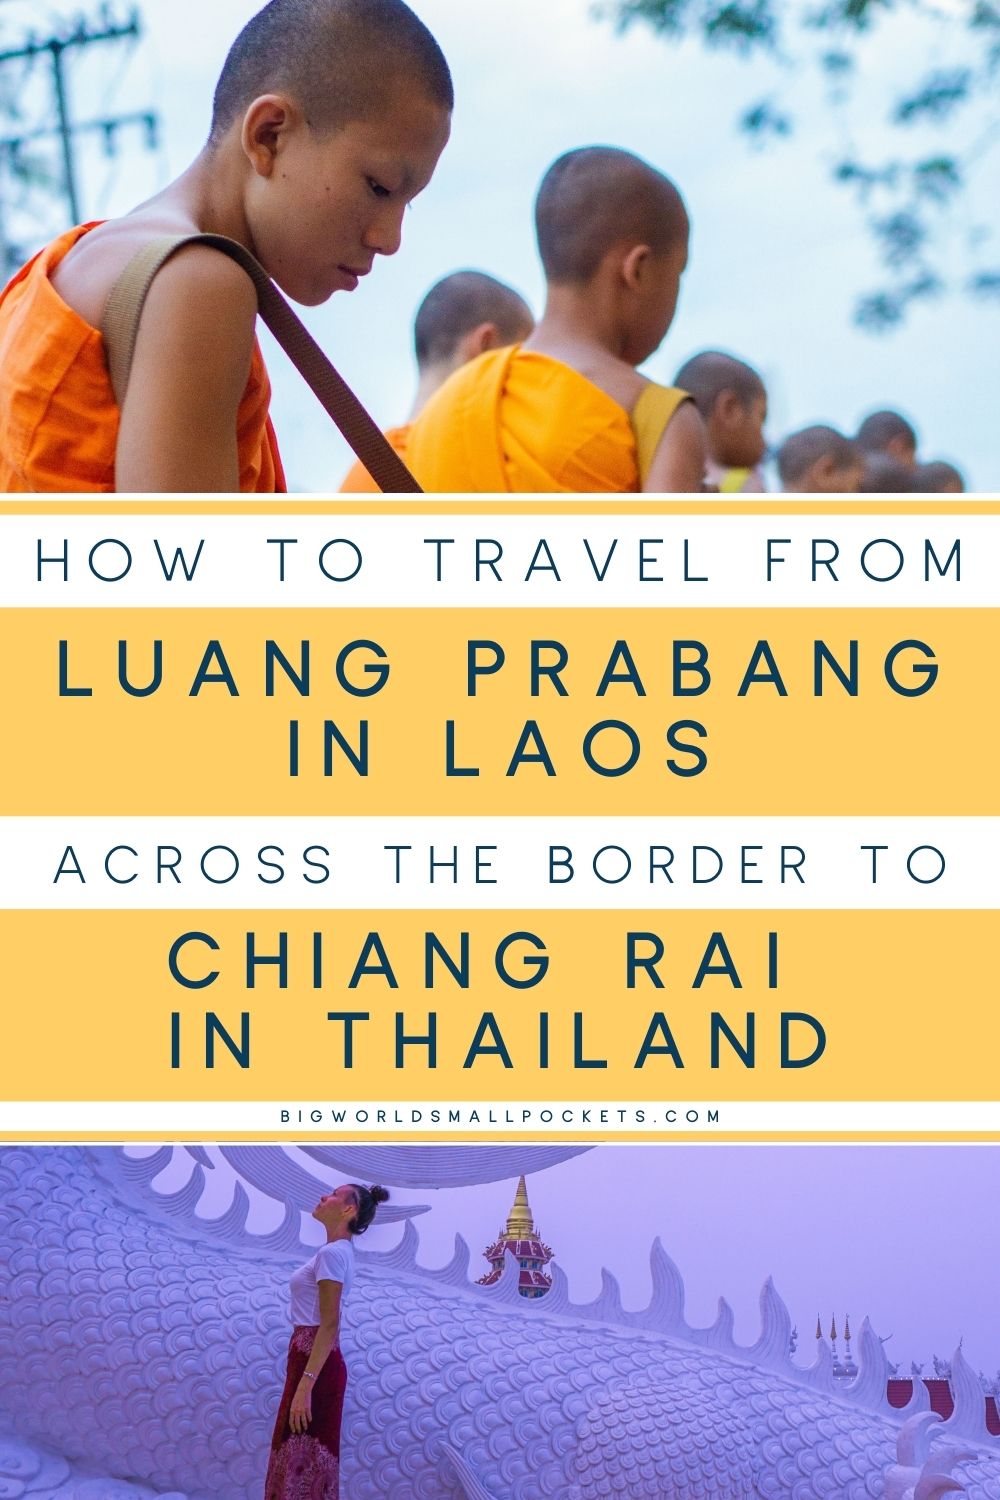 How to Travel from Chiang Rai in Thailand to Luang Prabang in Laos